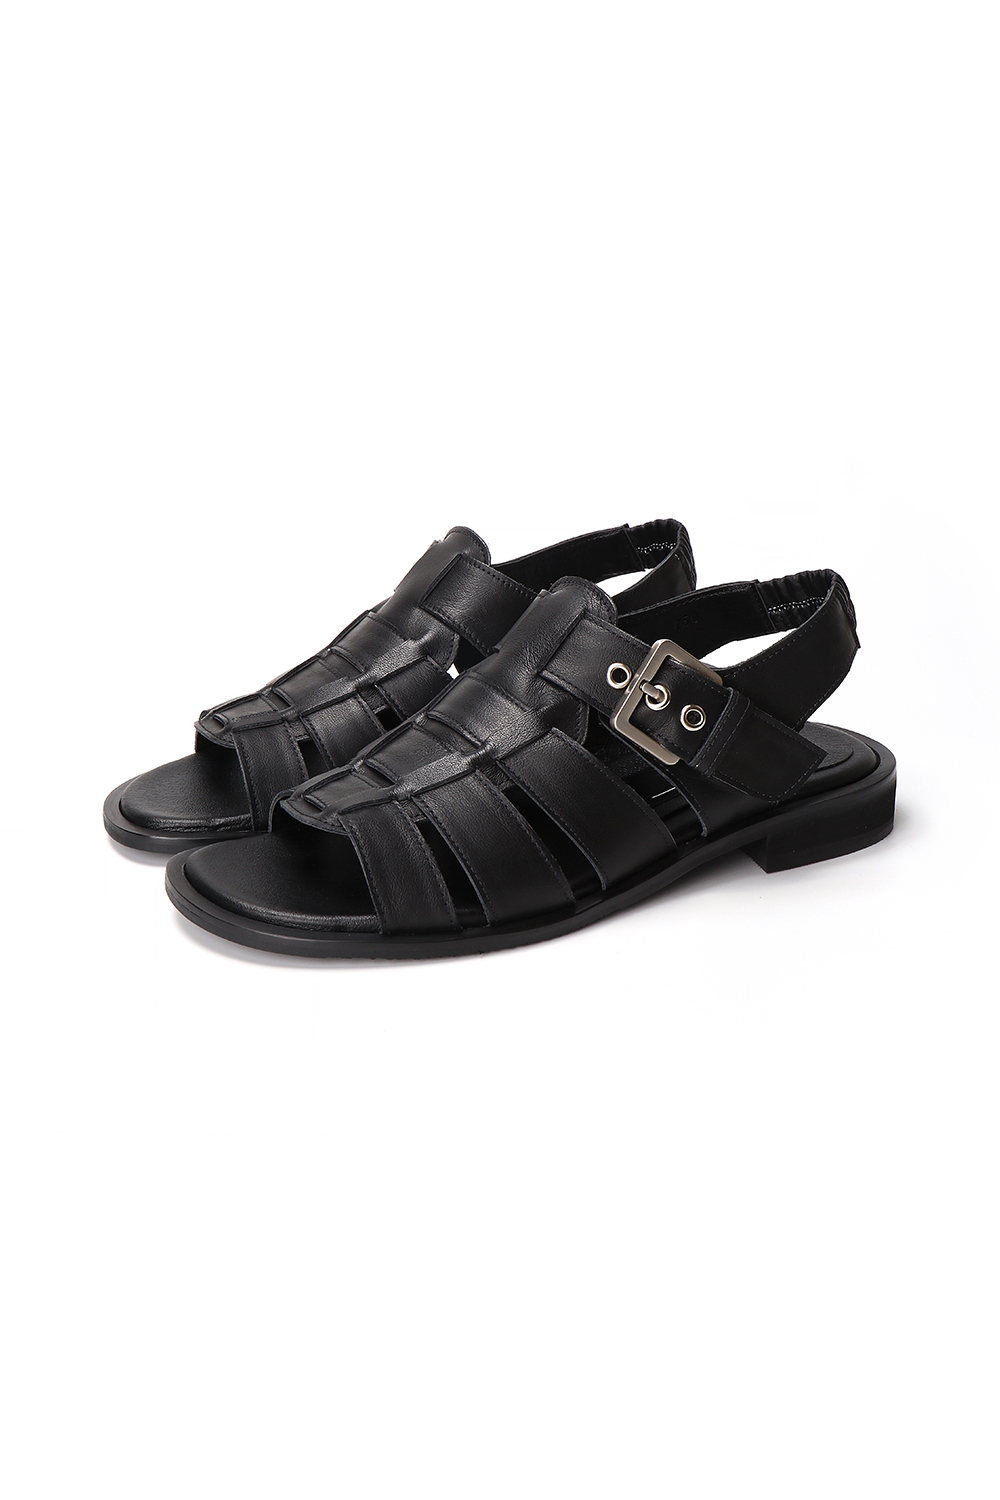 MILLY FLAT SANDALS [BLACK]